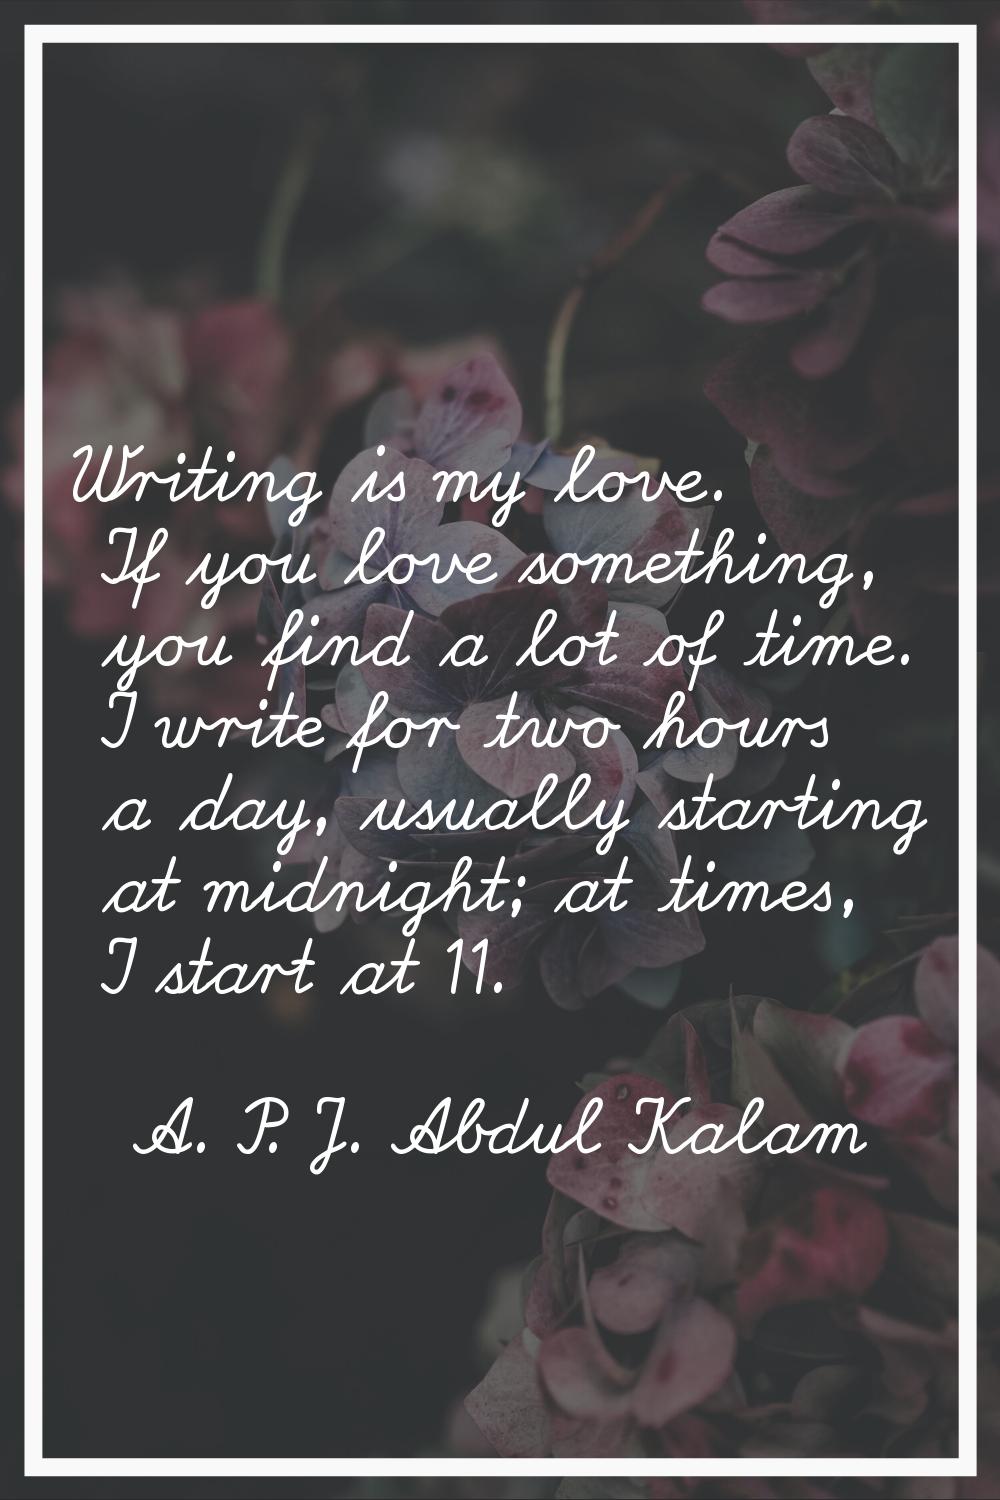 Writing is my love. If you love something, you find a lot of time. I write for two hours a day, usu